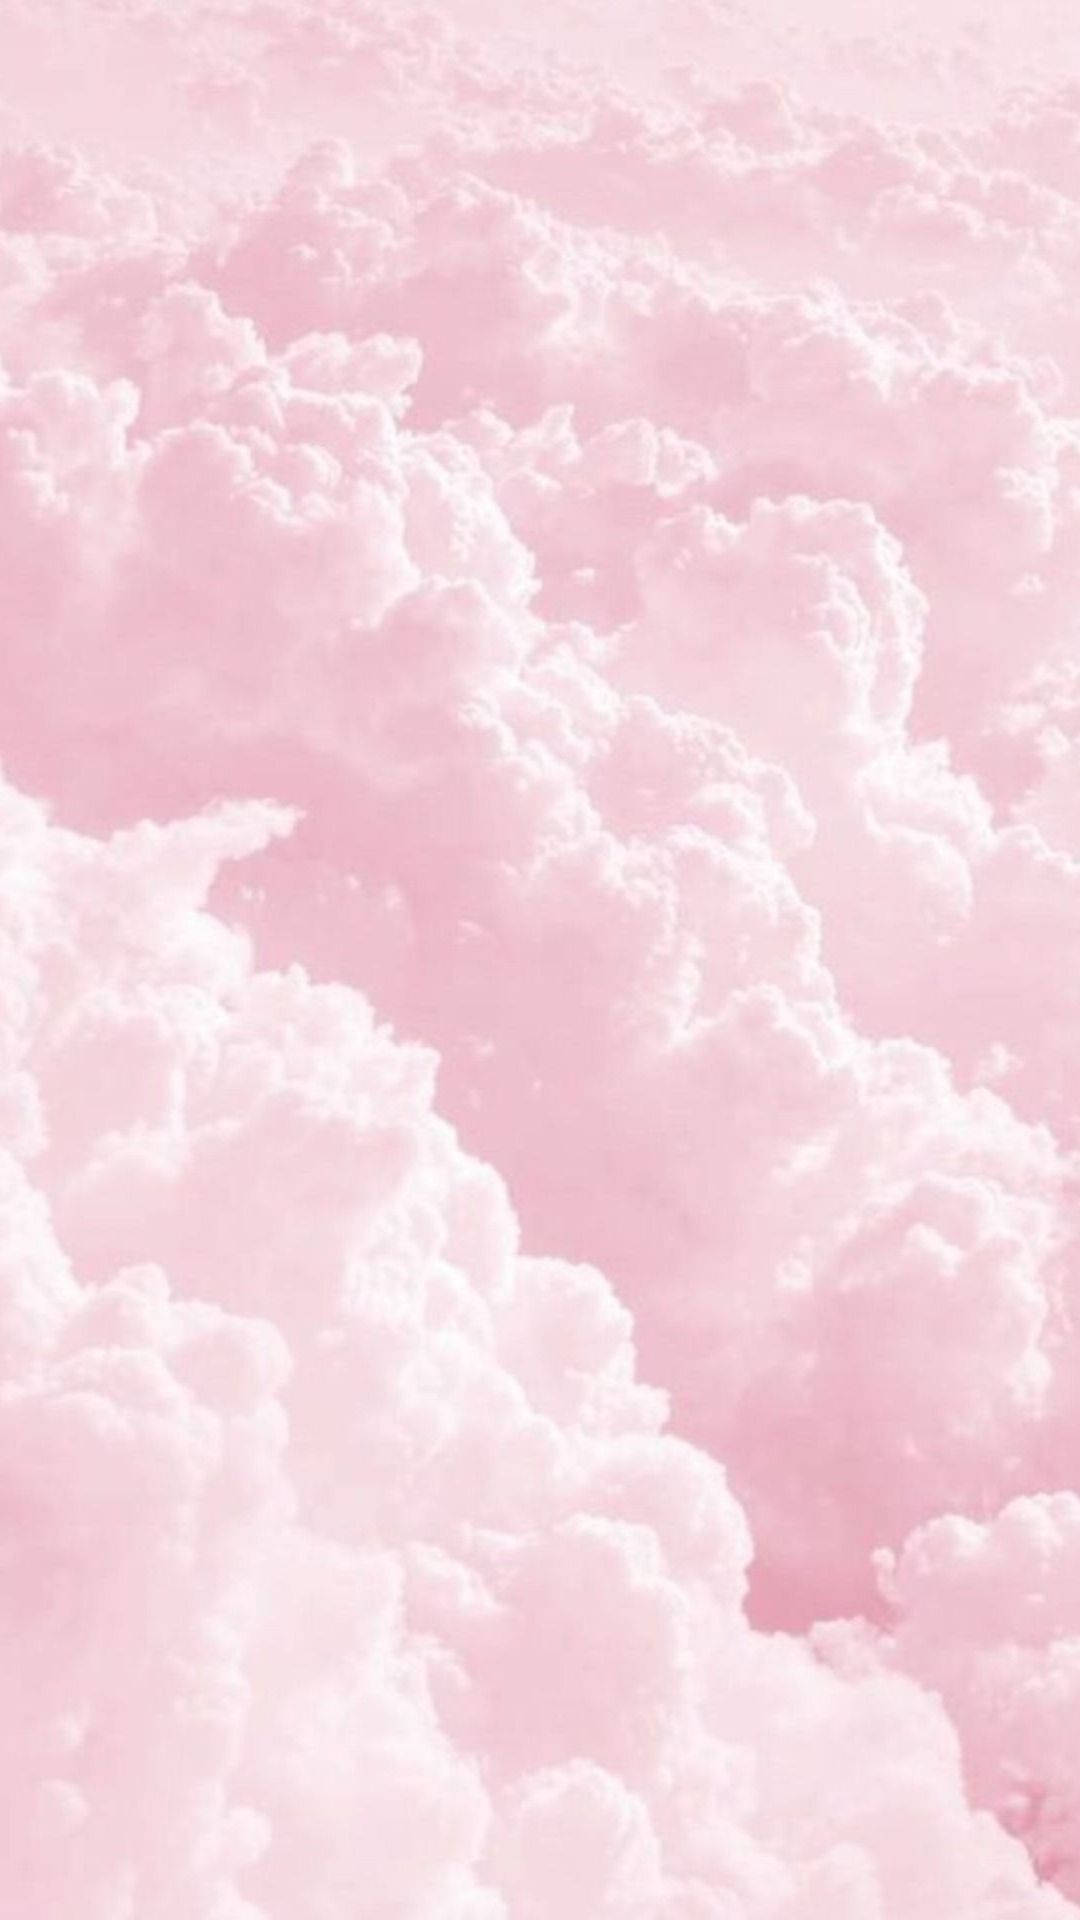 Calming Aesthetic Pink Sky Background